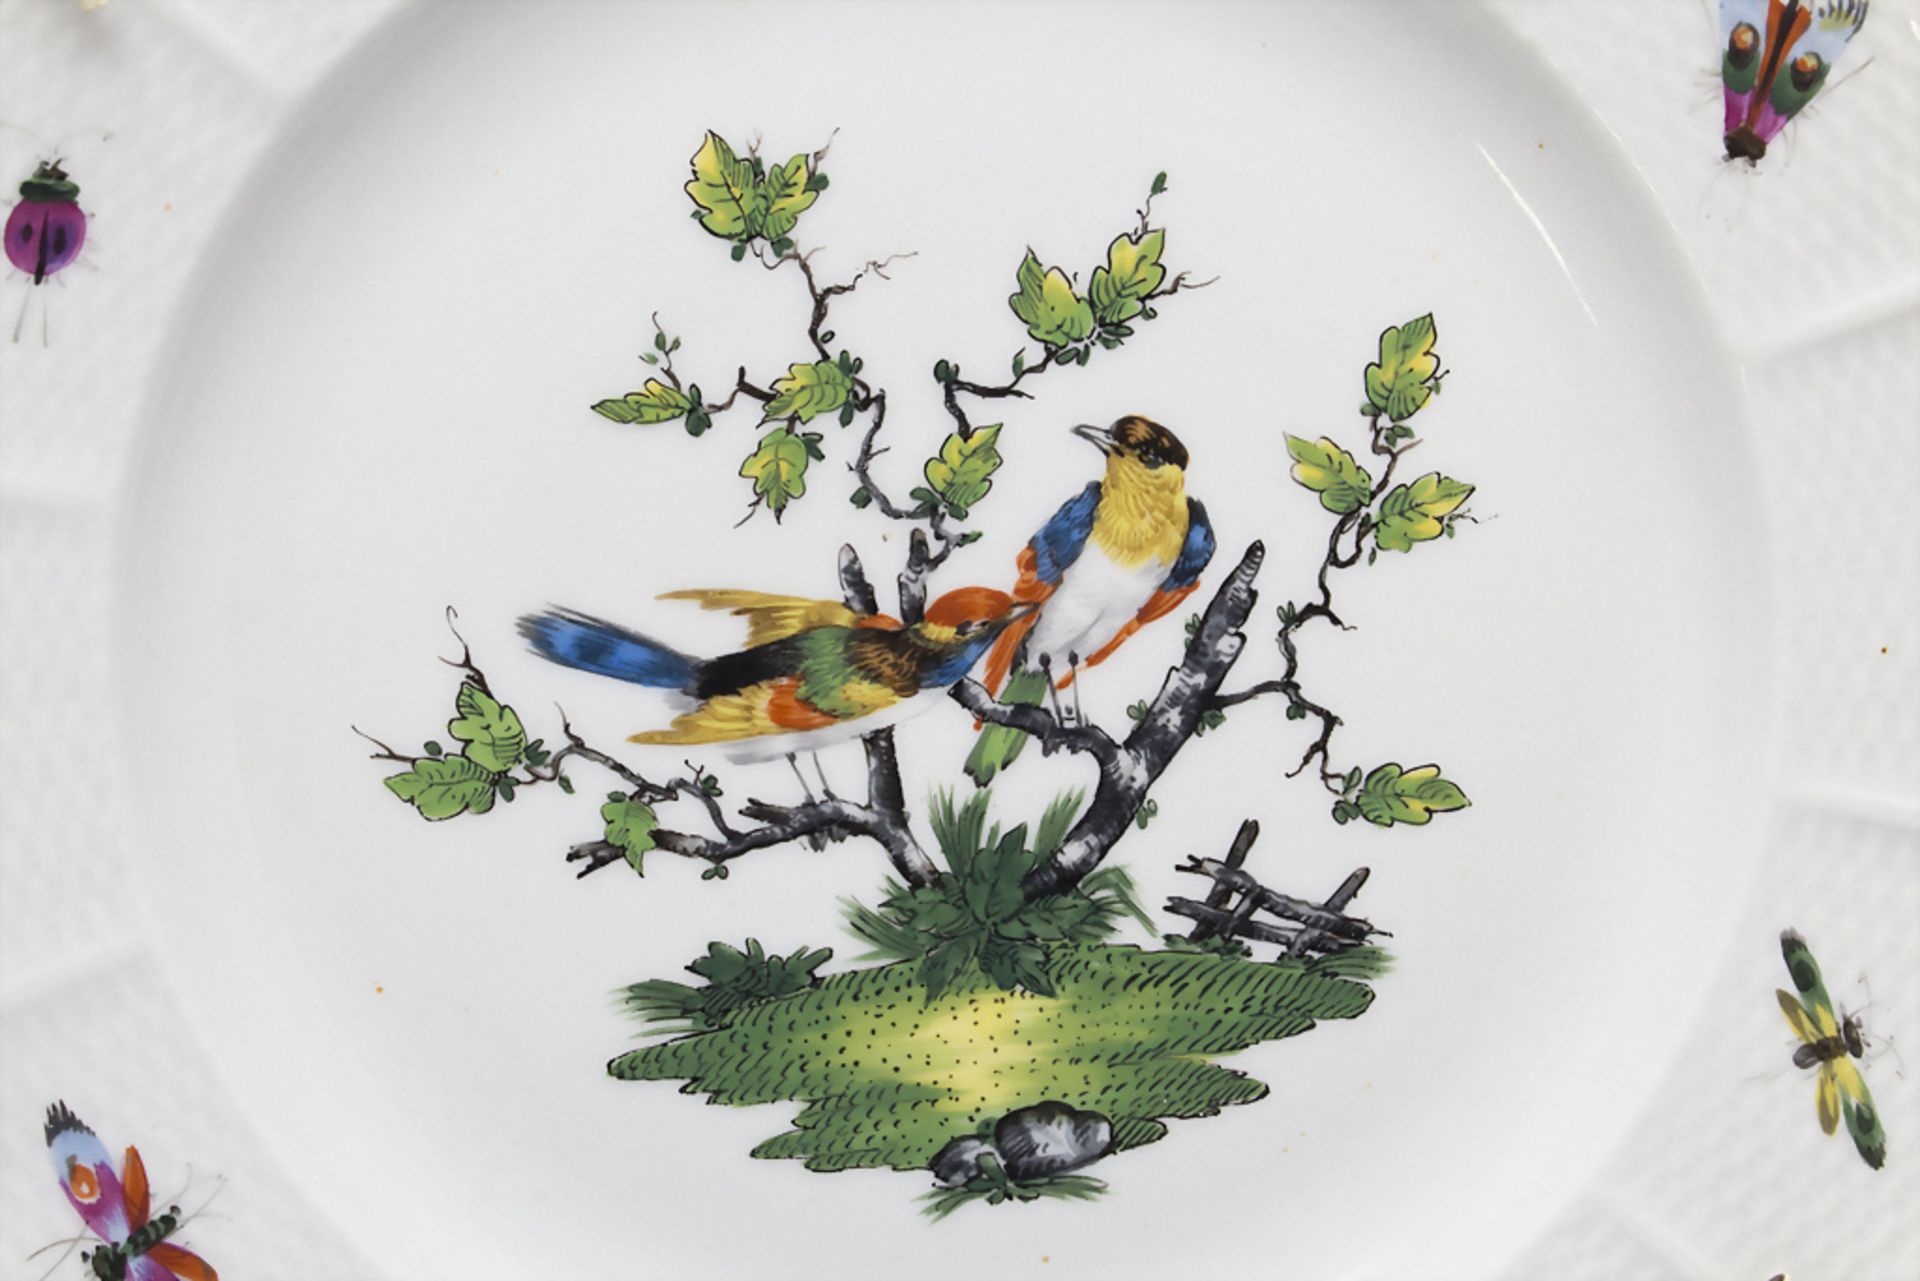 Teller mit Vogel- und Insektenmalerei / A plate with birds and insect paintings, Ludwigsburg, ... - Image 2 of 4